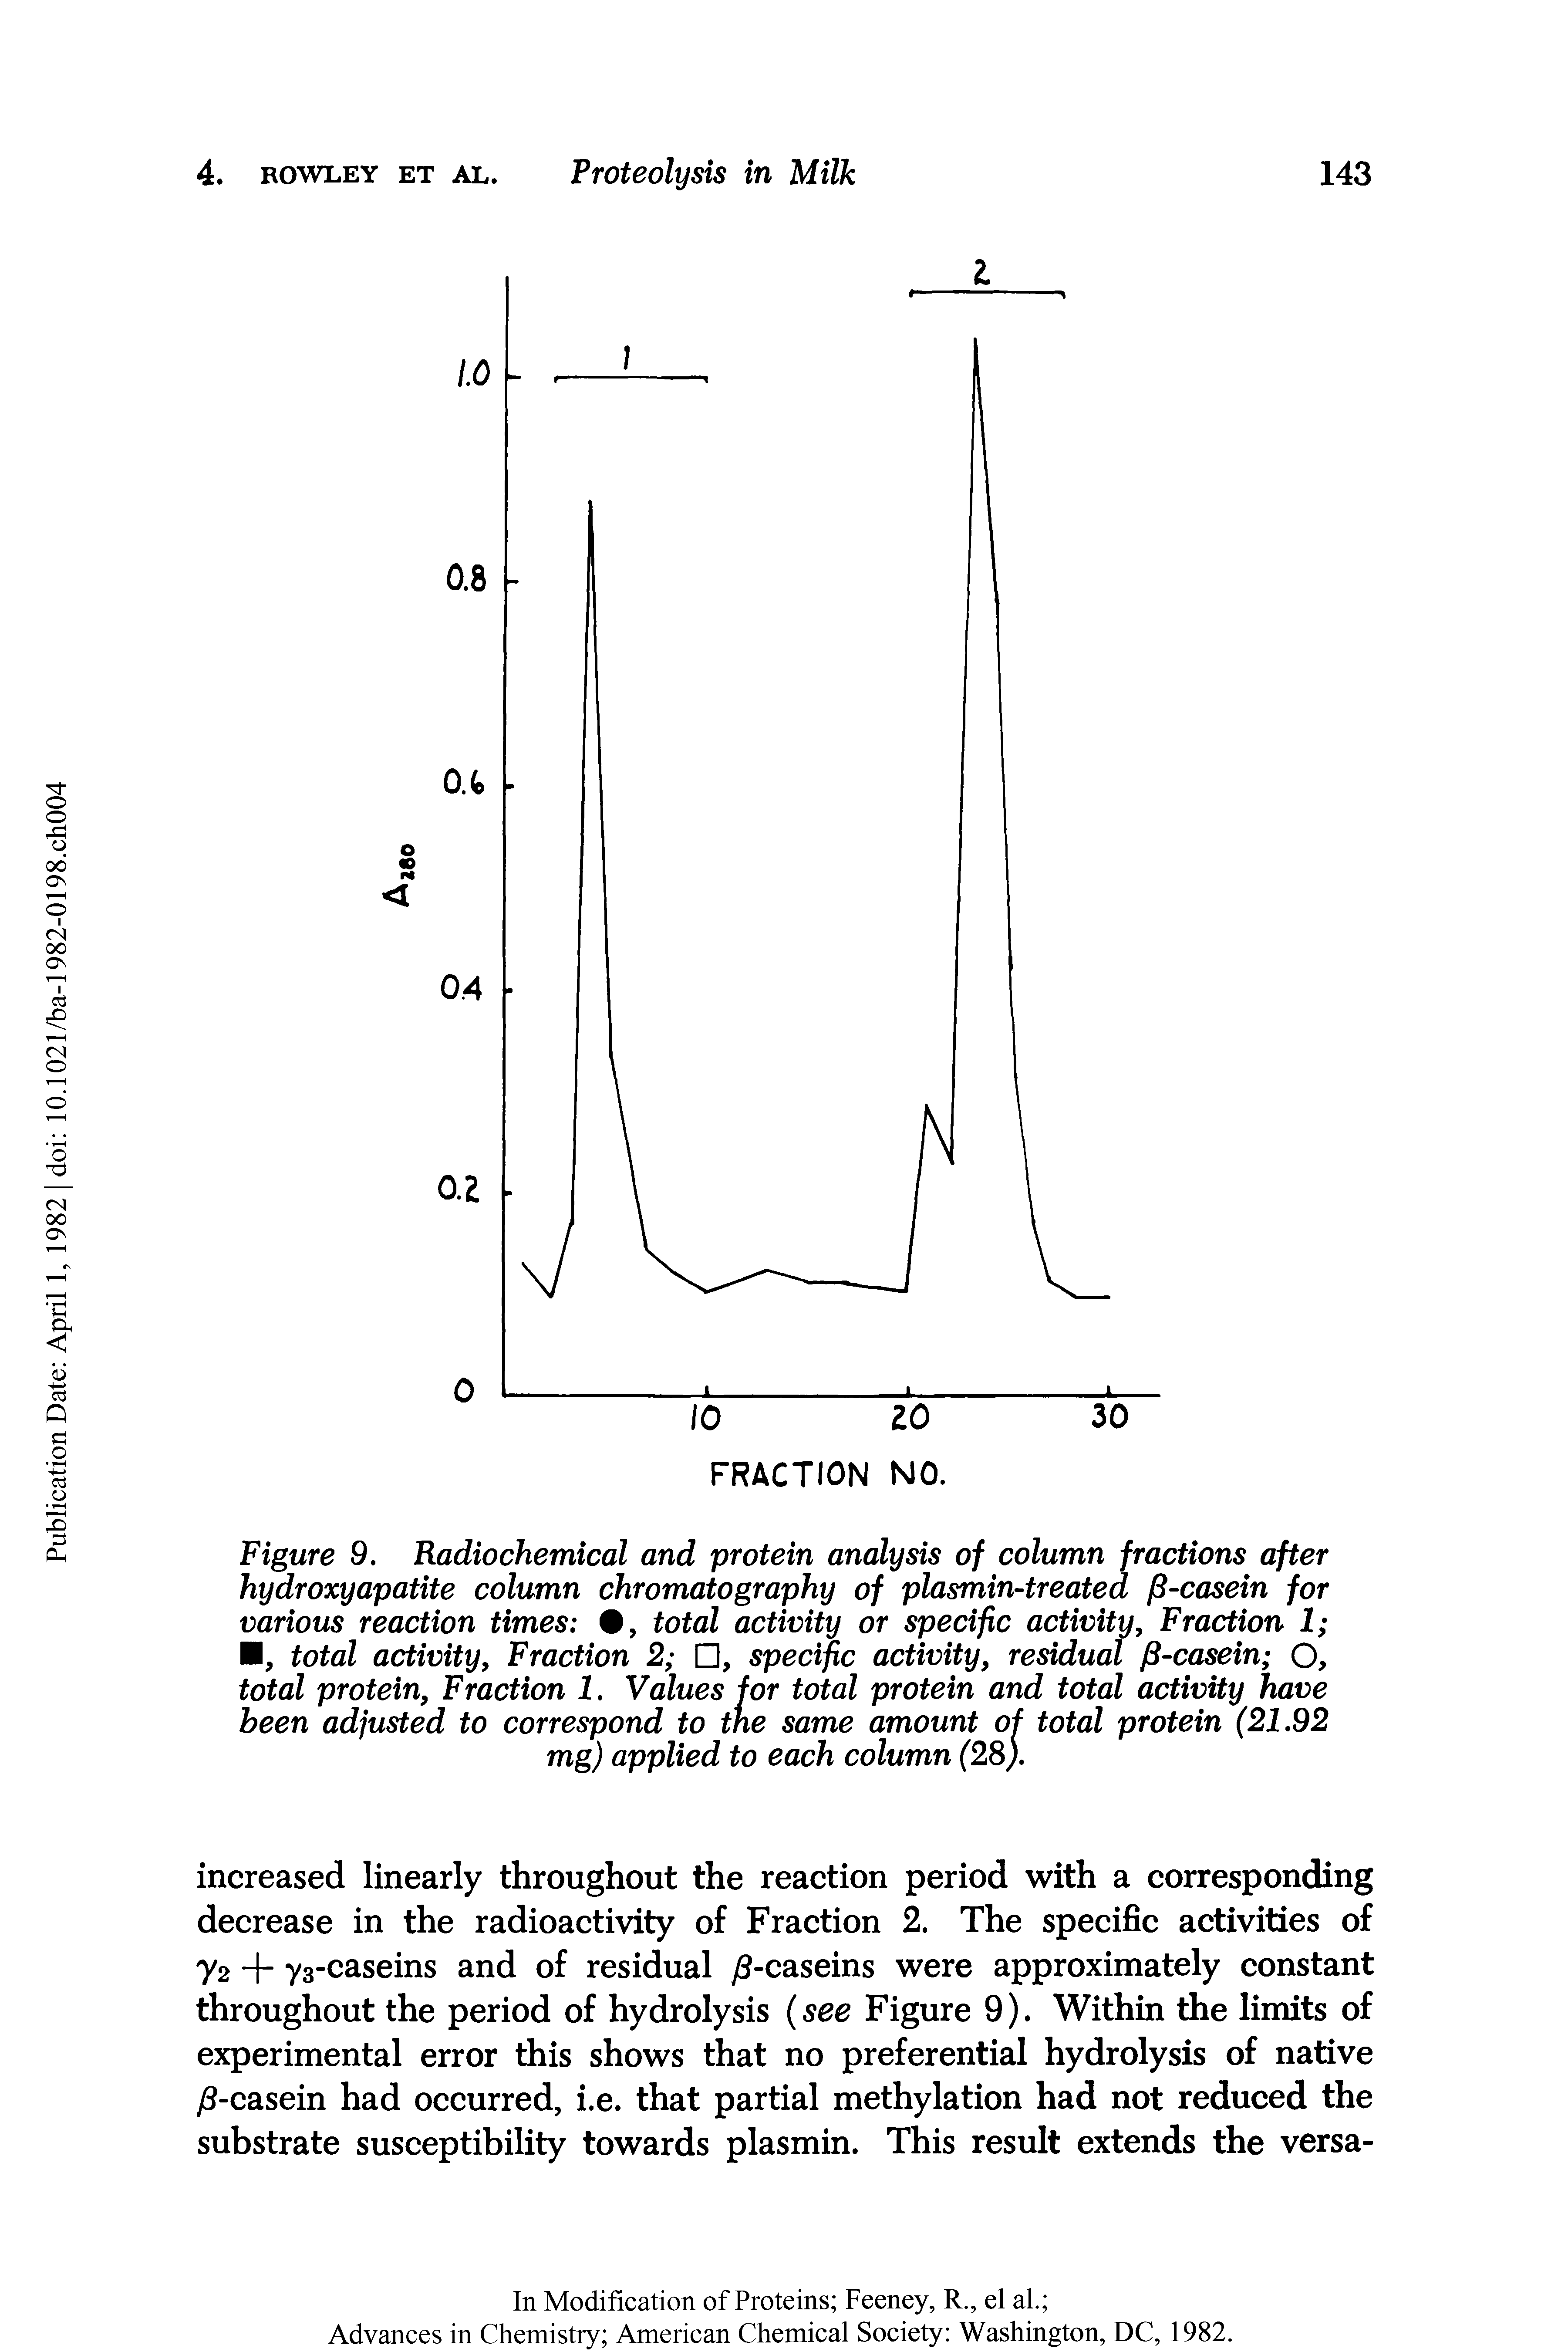 Figure 9. Radiochemical and protein analysis of column fractions after hydroxyapatite column chromatography of plasmin-treated (3-casein for various reaction times , total activity or specific activity, Fraction 1 M, total activity, Fraction 2 , specific activity, residual /3-casein O, total protein, Fraction 1. Values for total protein and total activity have been adjusted to correspond to trie same amount of total protein (21.92 mg) applied to each column (28).